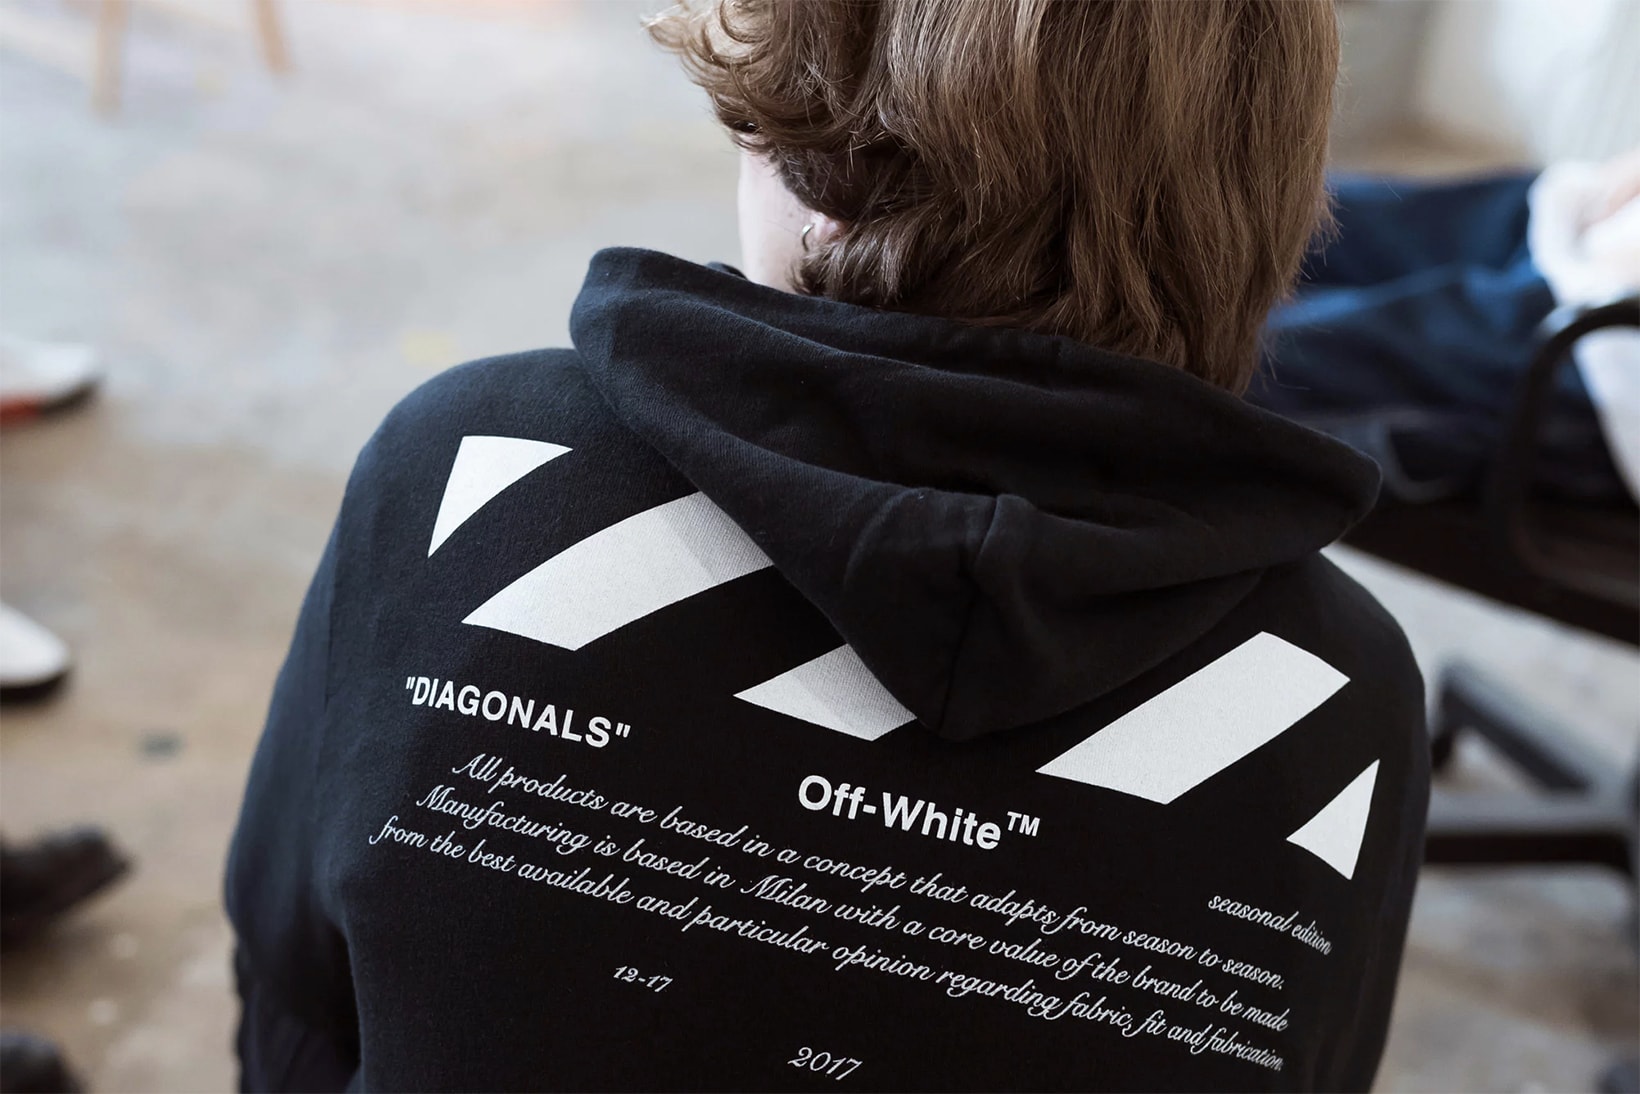 Off-White™ "For All" Collection | Hypebeast